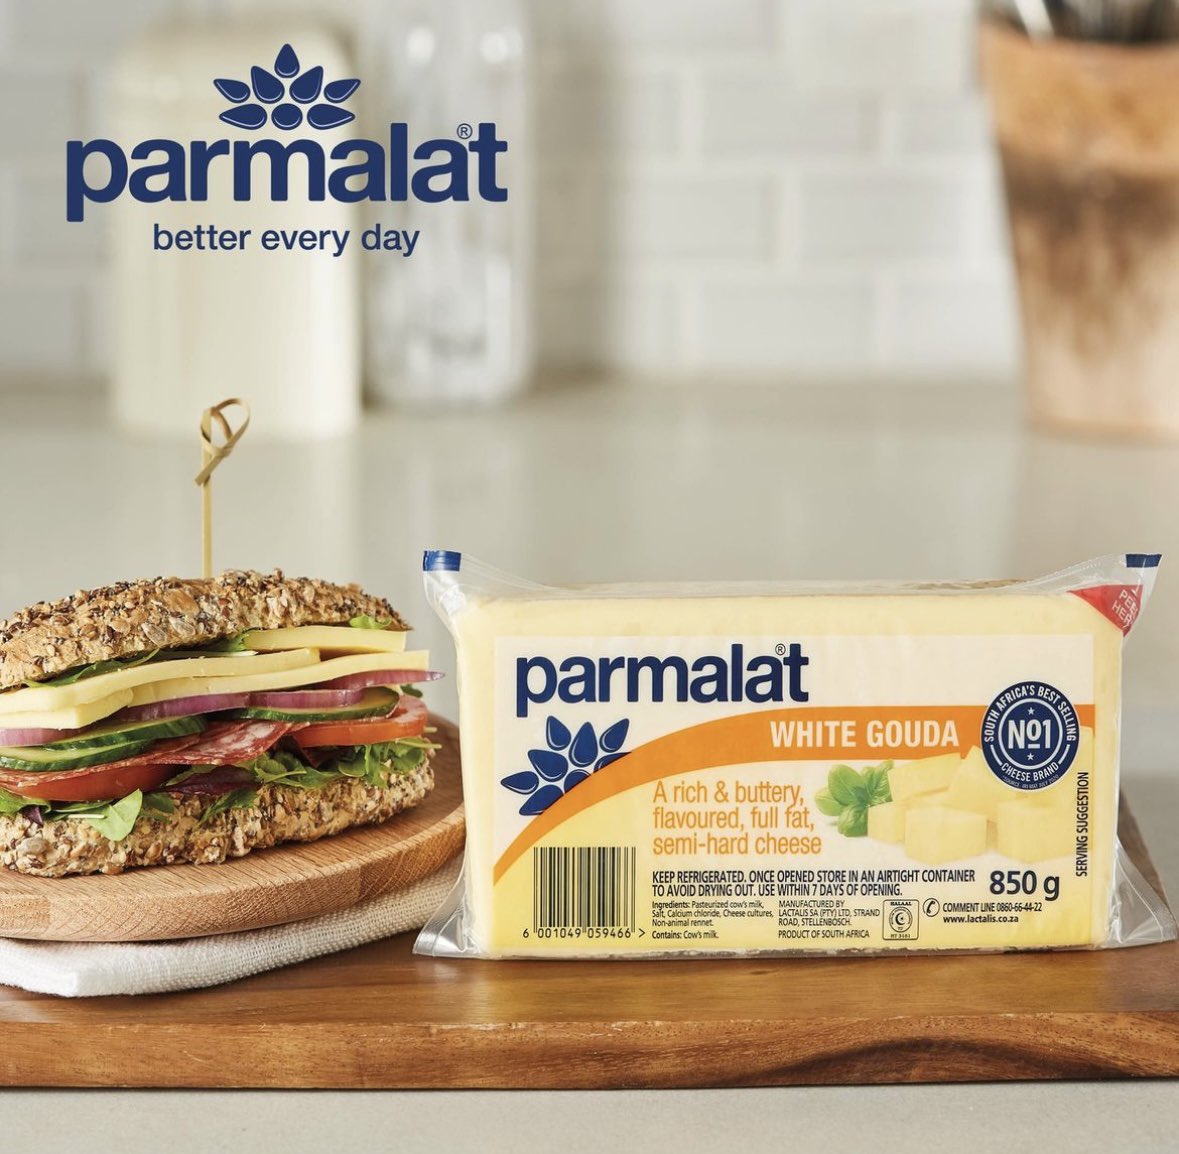 Let me put you onto SA's No. 1 cheese brand!🧀
For better meals, upgrade your tastebuds with the Parmalat 850g cheese block today😁 You will never go wrong with this one🤞🏿#StinaKeBosso #Parmalat #BetterChoices